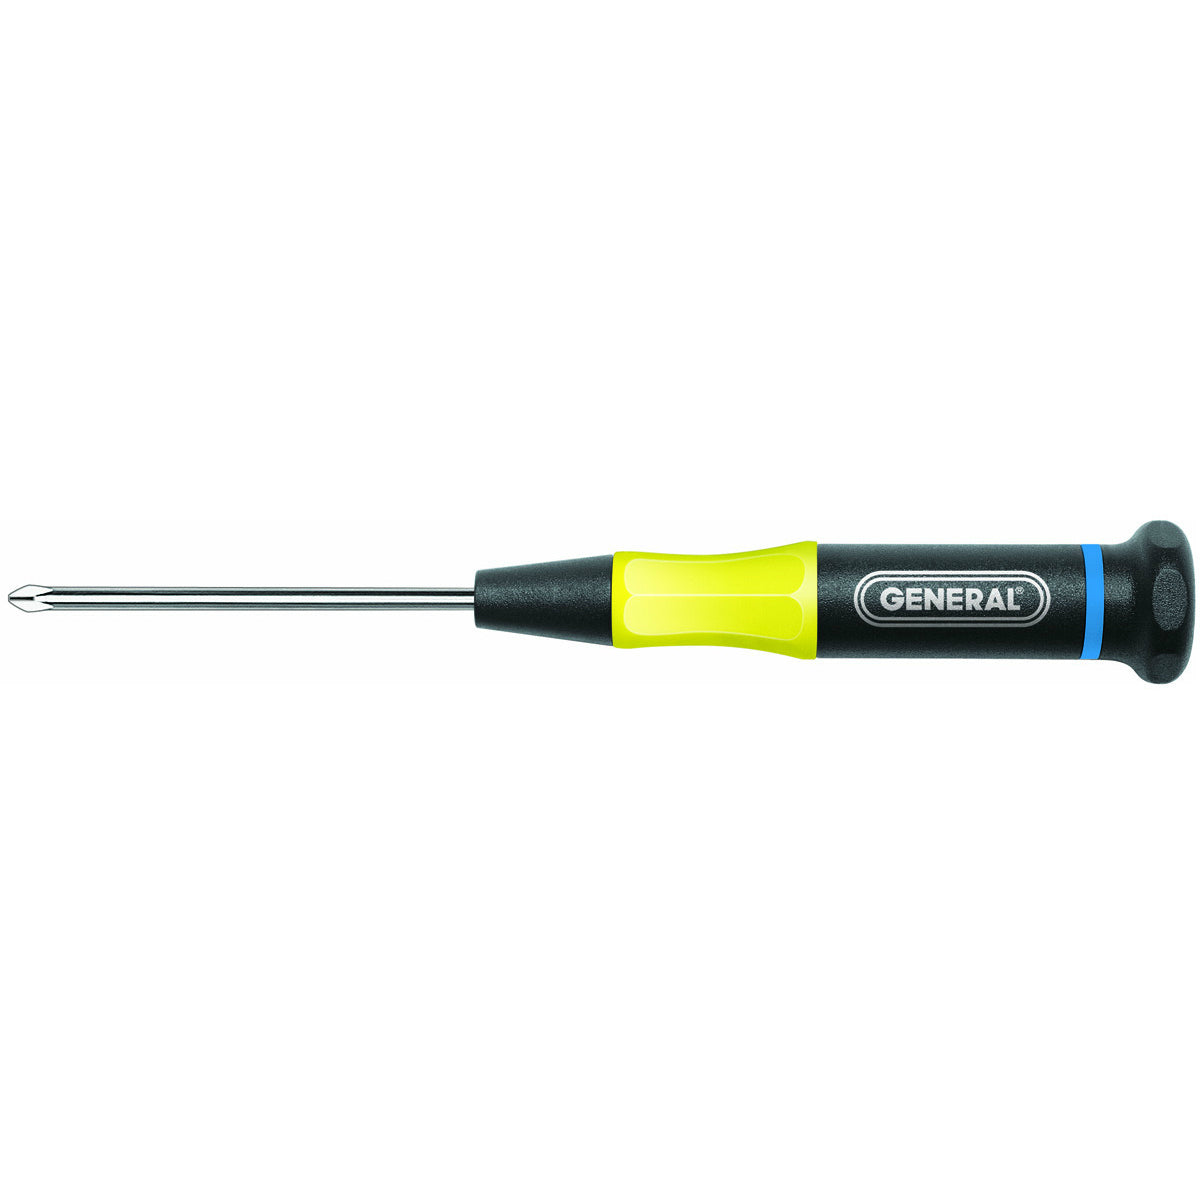 General Tools 612020 Phillips Screwdriver with #0 Precision, 4-7/8”